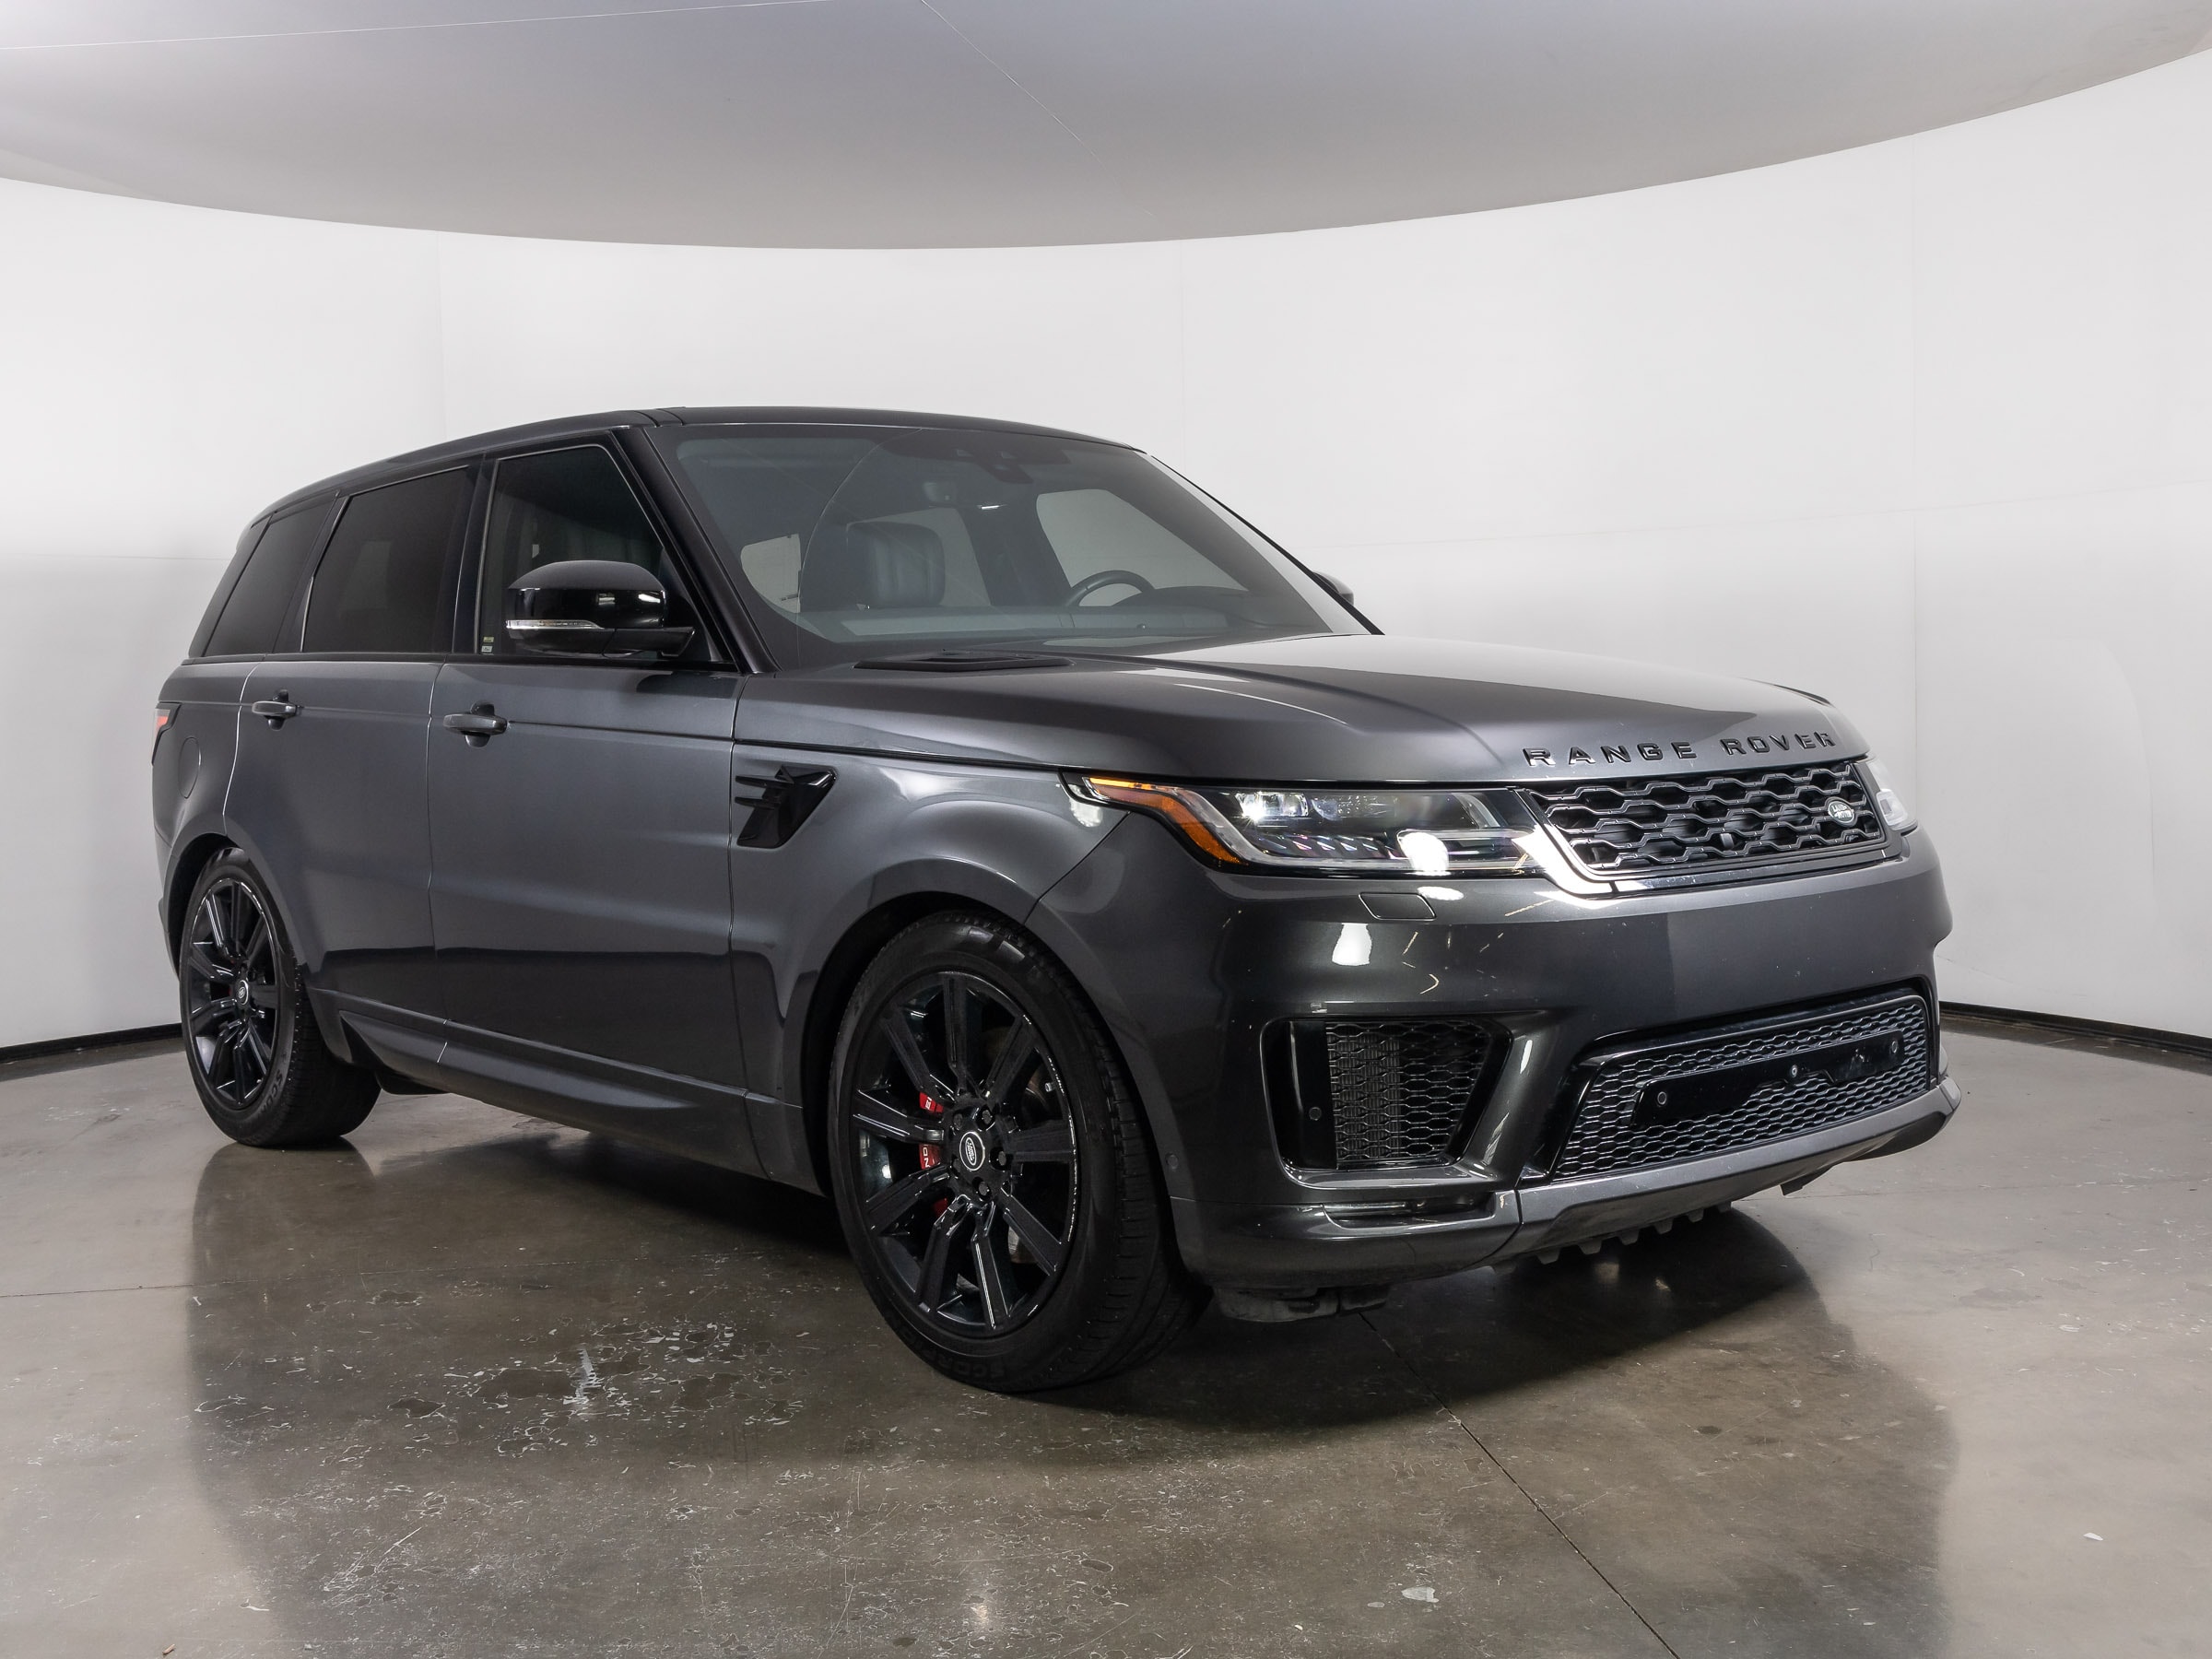 Used 2019 Land Rover Range Rover Sport For Sale Plano Tx Vin Salwr2re4ka815284